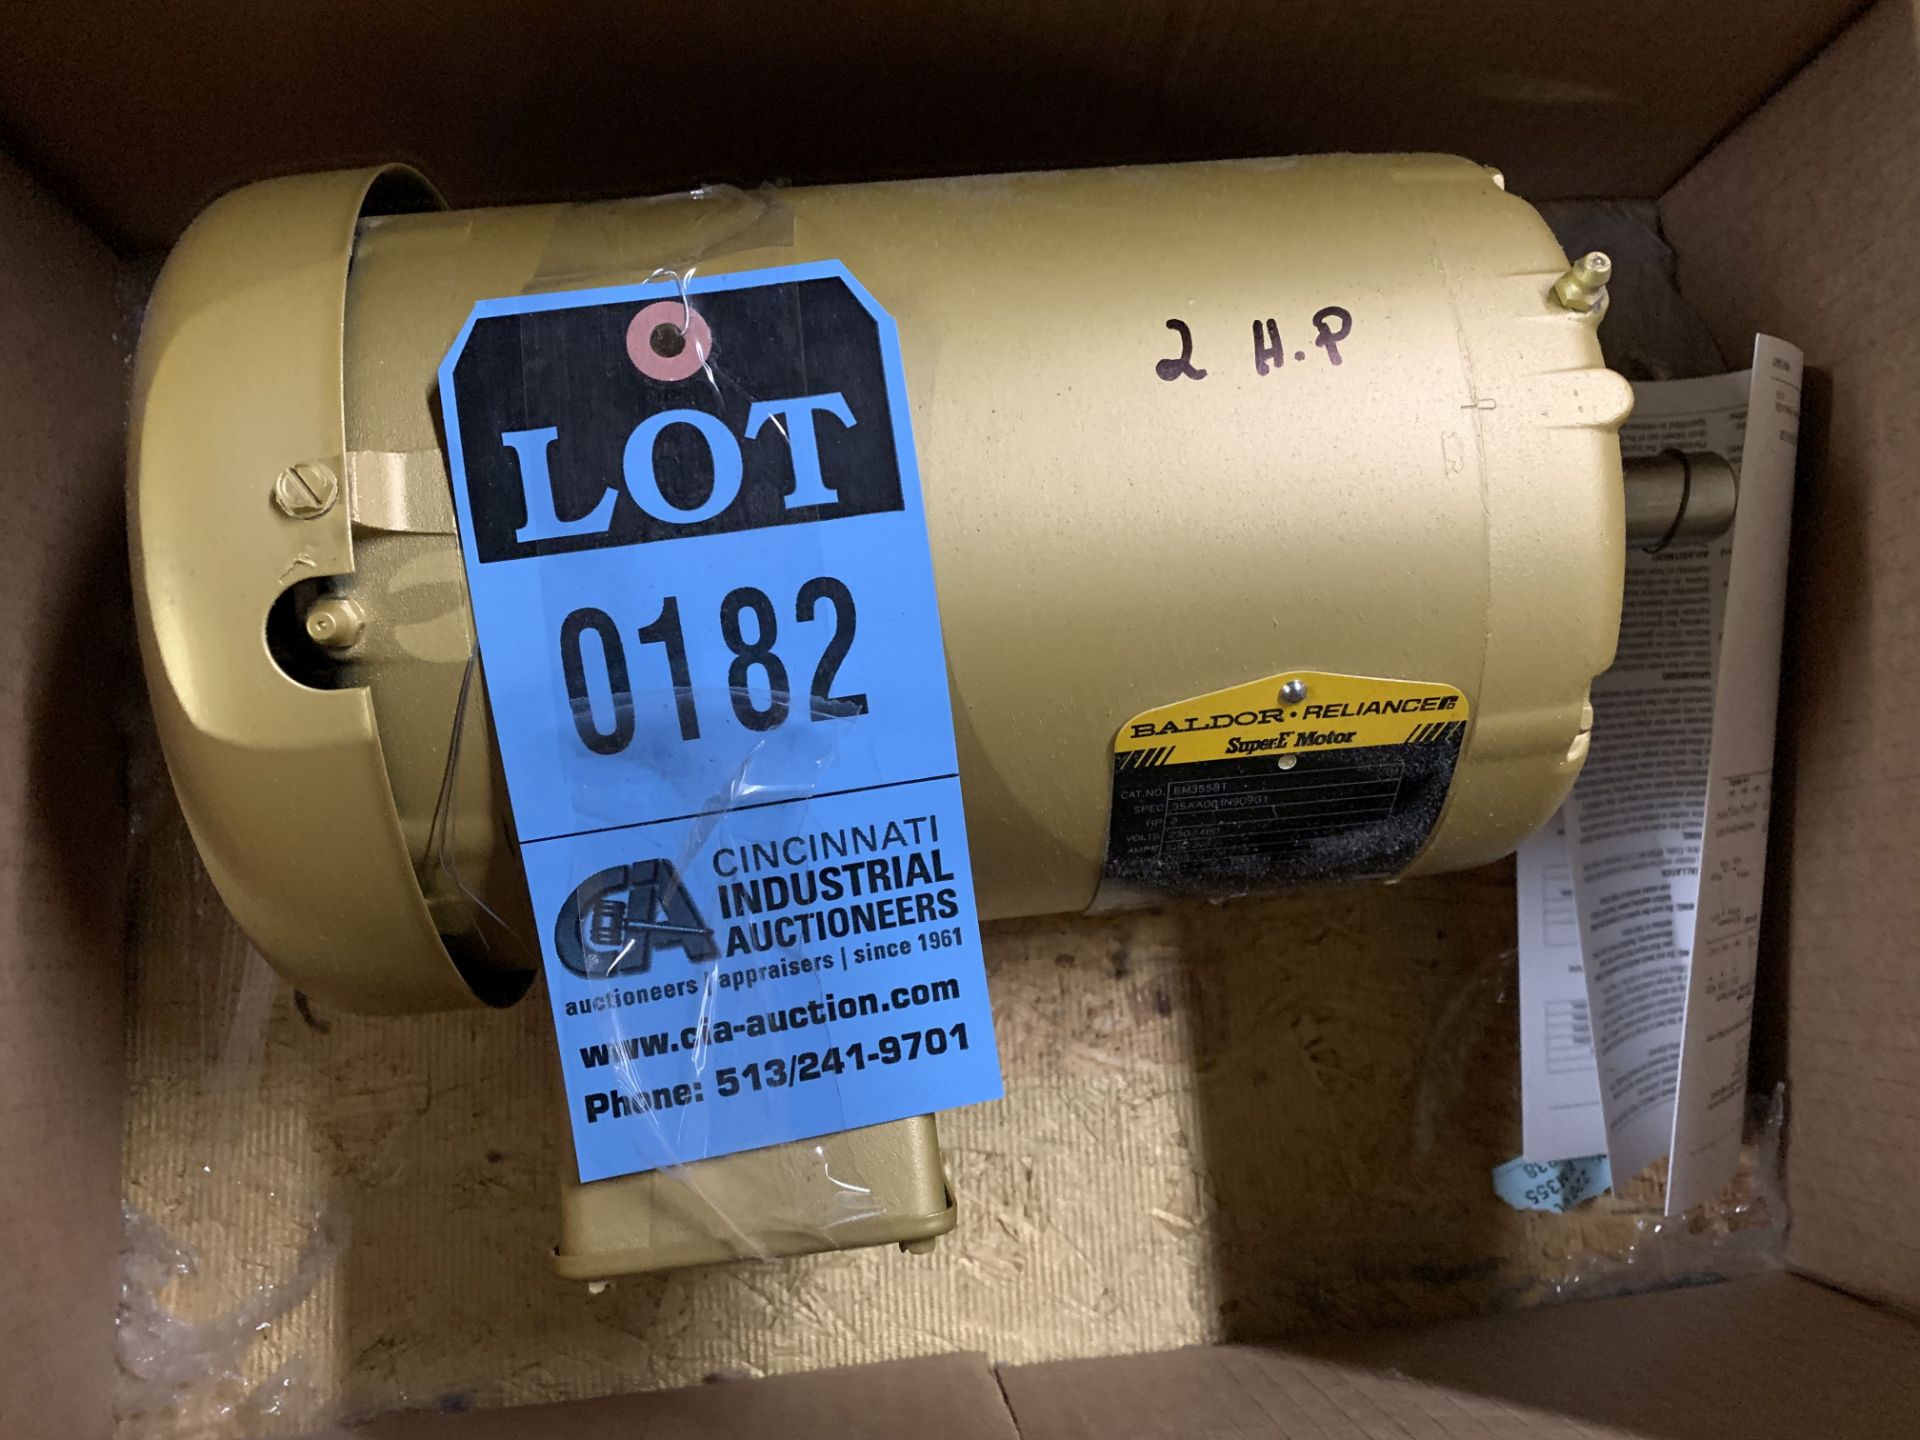 2 HP BALDOR RELIANCE ELECTRIC MOTOR - NEW **LOCATED AT 111 W. WESTCOTT WAY**